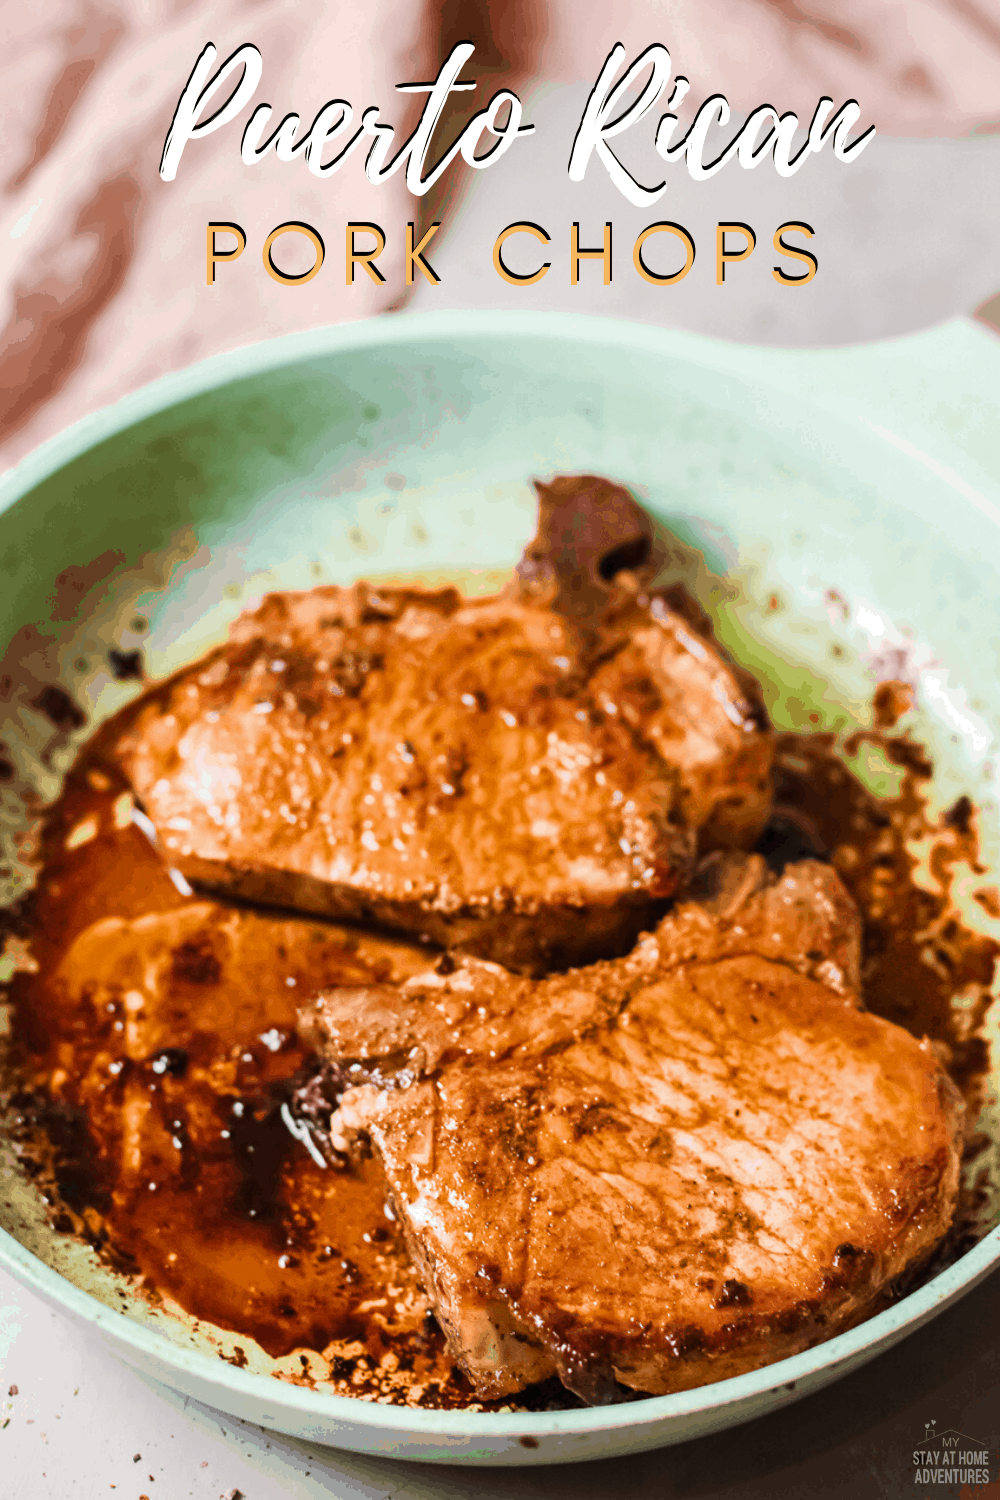 Learn how to make juicy Puerto Rican pork chops. From what style of pork chops to use, to how to fry them to perfection. Print the recipe here! #puertoricanrecipes #porkchops #friedfood #chuletas via @mystayathome